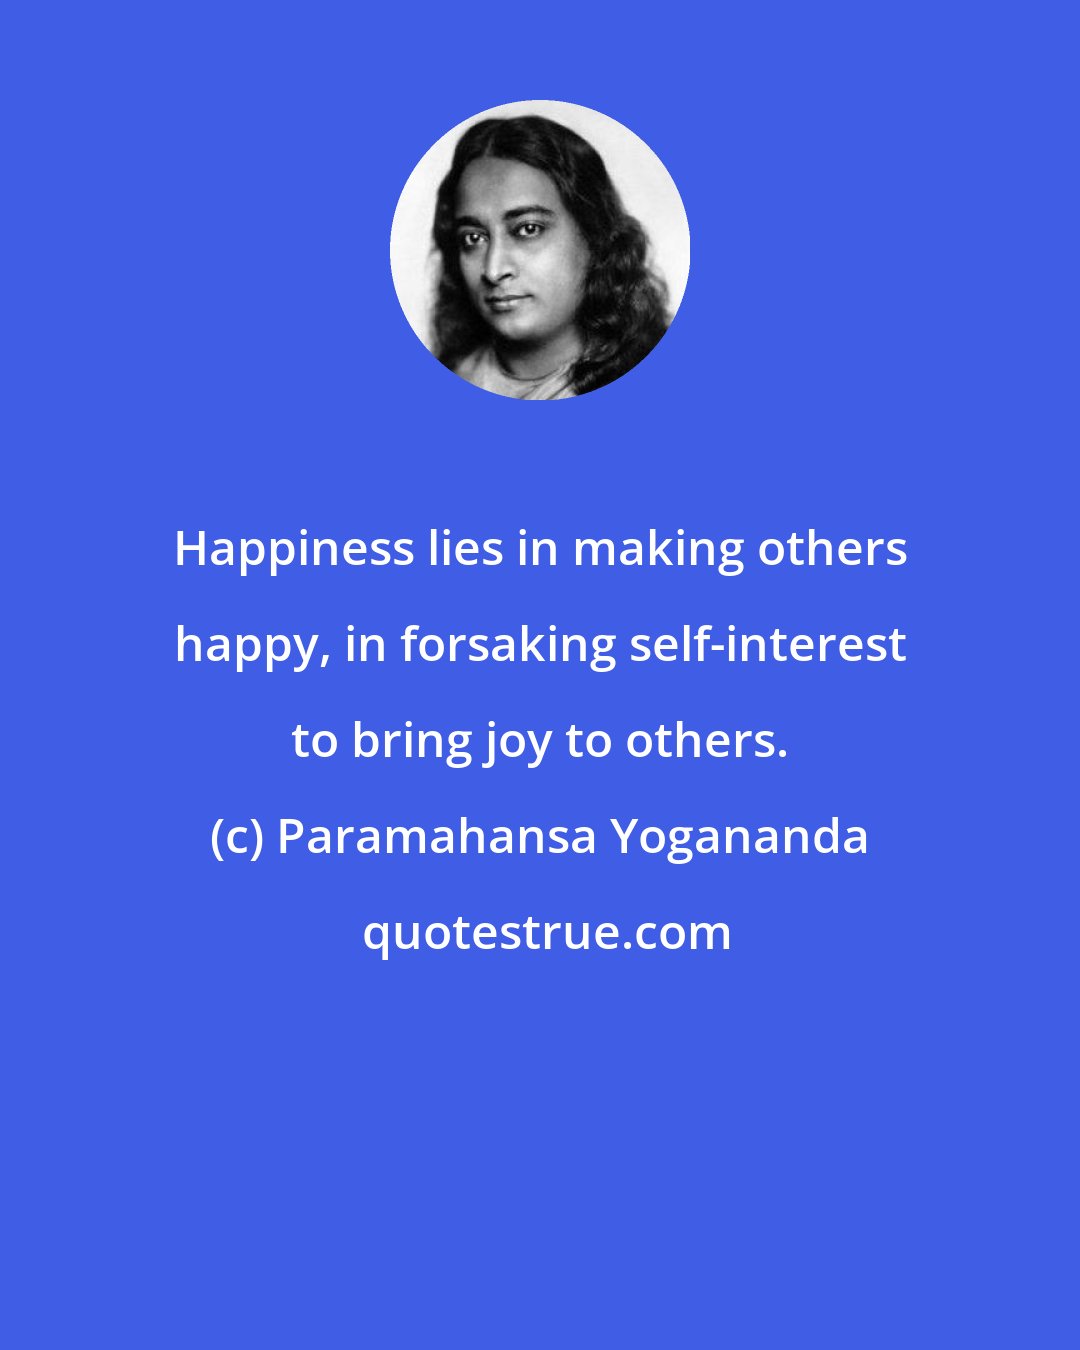 Paramahansa Yogananda: Happiness lies in making others happy, in forsaking self-interest to bring joy to others.